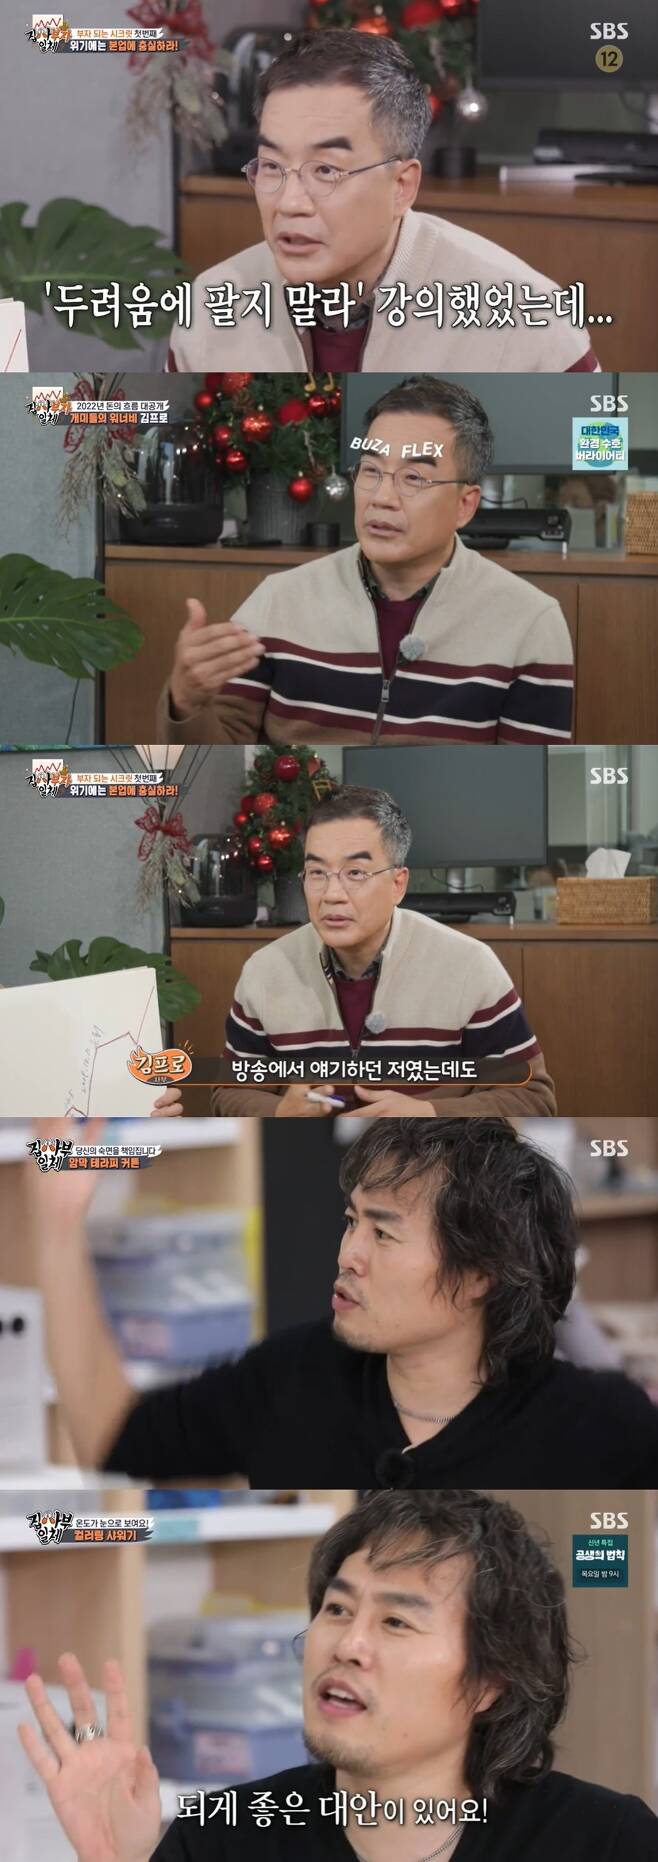 Seoul) = Kim Pro Kim Dong-hwan talked about how to make money.In the SBS entertainment program All The Butlers broadcasted on the afternoon of the 9th, Lee Seung-gi, Kim Dong-Hyun, Yang Se-hyeong and Yoo Soo-bin met Kim Dong-hwan and talked about how to become rich.The members visited Kim Dong-hwan, who will predict the flow of money in 2022. The members who visited the skyscraper in Yeouido to meet Kim Dong-hwan showed nervousness from the moment they took their first step.The members who met Kim Dong-hwan greeted him with a bright greeting.Kim Dong-hwan said, I will make sure you enjoy economic freedom.He said, I have been thinking of me as rich for about 10 years, he said. I have never said reduce it because of money when I try to do something for important people such as my family.Of course, I love it when I buy something.Kim Dong-hwan said, Basically, I earned money by working, he said, I originally worked as a financial company, and I worked there for about 20 years.Kim Dong-hwan asked the members who asked how to become rich, Is it difficult to go to a prestigious university, or is it difficult to become rich?The members chose the rich, but Kim Dong-hwan wondered that it was harder to go to a prestigious university.Kim Dong-hwan said, The children who study hard are hard, but there are not many people who go well to good universities around. Thats it, there is a garden.I can not go to 101 if I study hard, he said. But the rich have no garden.Kim Dong-hwan had time to look back on his financial life through the 1997 IMF, the 2008 World Financial Danger, and the 2020 Corona 19 Danger.At this time, Kim Dong-hwan said, There are three kinds of Danger in common, he said. We have to be faithful to our business and keep our essence.At first, I collected money in 1997 and went to study in England, he said. I sold all the stocks and cashed the money to concentrate on my studies. If I had it, the money would have been a toilet paper.As a result of being faithful to my business, I was able to pass the IMF well.Kim Dong-hwan said, In 2008, assets have risen tremendously from the global financial Danger.I have been doing business in the United States since 2005, he said. I had a fashion editing shop and sold all the stocks I had to make business funds.He also said, In early 2020, the stock price was smashed because of Corona 19. There was -70% of the stocks I had.I told him that I should not sell it on the air, but at some point I thought it was not going to ruin the world, he added. But I have been keeping it and I have increased my assets.Kim Dong-hwan explained, Buying stocks is technology and selling stocks is art. He said, Major works are not made throughout your life, so when you live, you study and worry for at least 10 days.On the other hand, following the last broadcast, Bae Sang-min Desiigner found a KAIST lecture room where he actually teaches.Lee Seung-gi, Kim Dong-Hyun, Yang Se-hyeong and Yoo Soo-bin could not hide their excitement as they entered the actual KAIST classroom.Bae Sang-min, Desiigner, had the class in KAIST to the members. What Bae Desiigner talked about was the sharing design.Sharing design was designed for those who were difficult, difficult, or marginalized.He then talked about Korean design and said, Why do you want to compete with your friends of the present age?I think beyond construction when I am worried about the role model of life, said Bae Desiigner. To me, Dasan is a design ideal.When he was alive, I was worried about what he did at my age and competed beyond construction, he said. I thought he should have lived that life, but I thought he should have half of his life.In addition, Bae Desiigner compares 10% of wealth with 90% of life that does not, and he also wants to design for 90%.